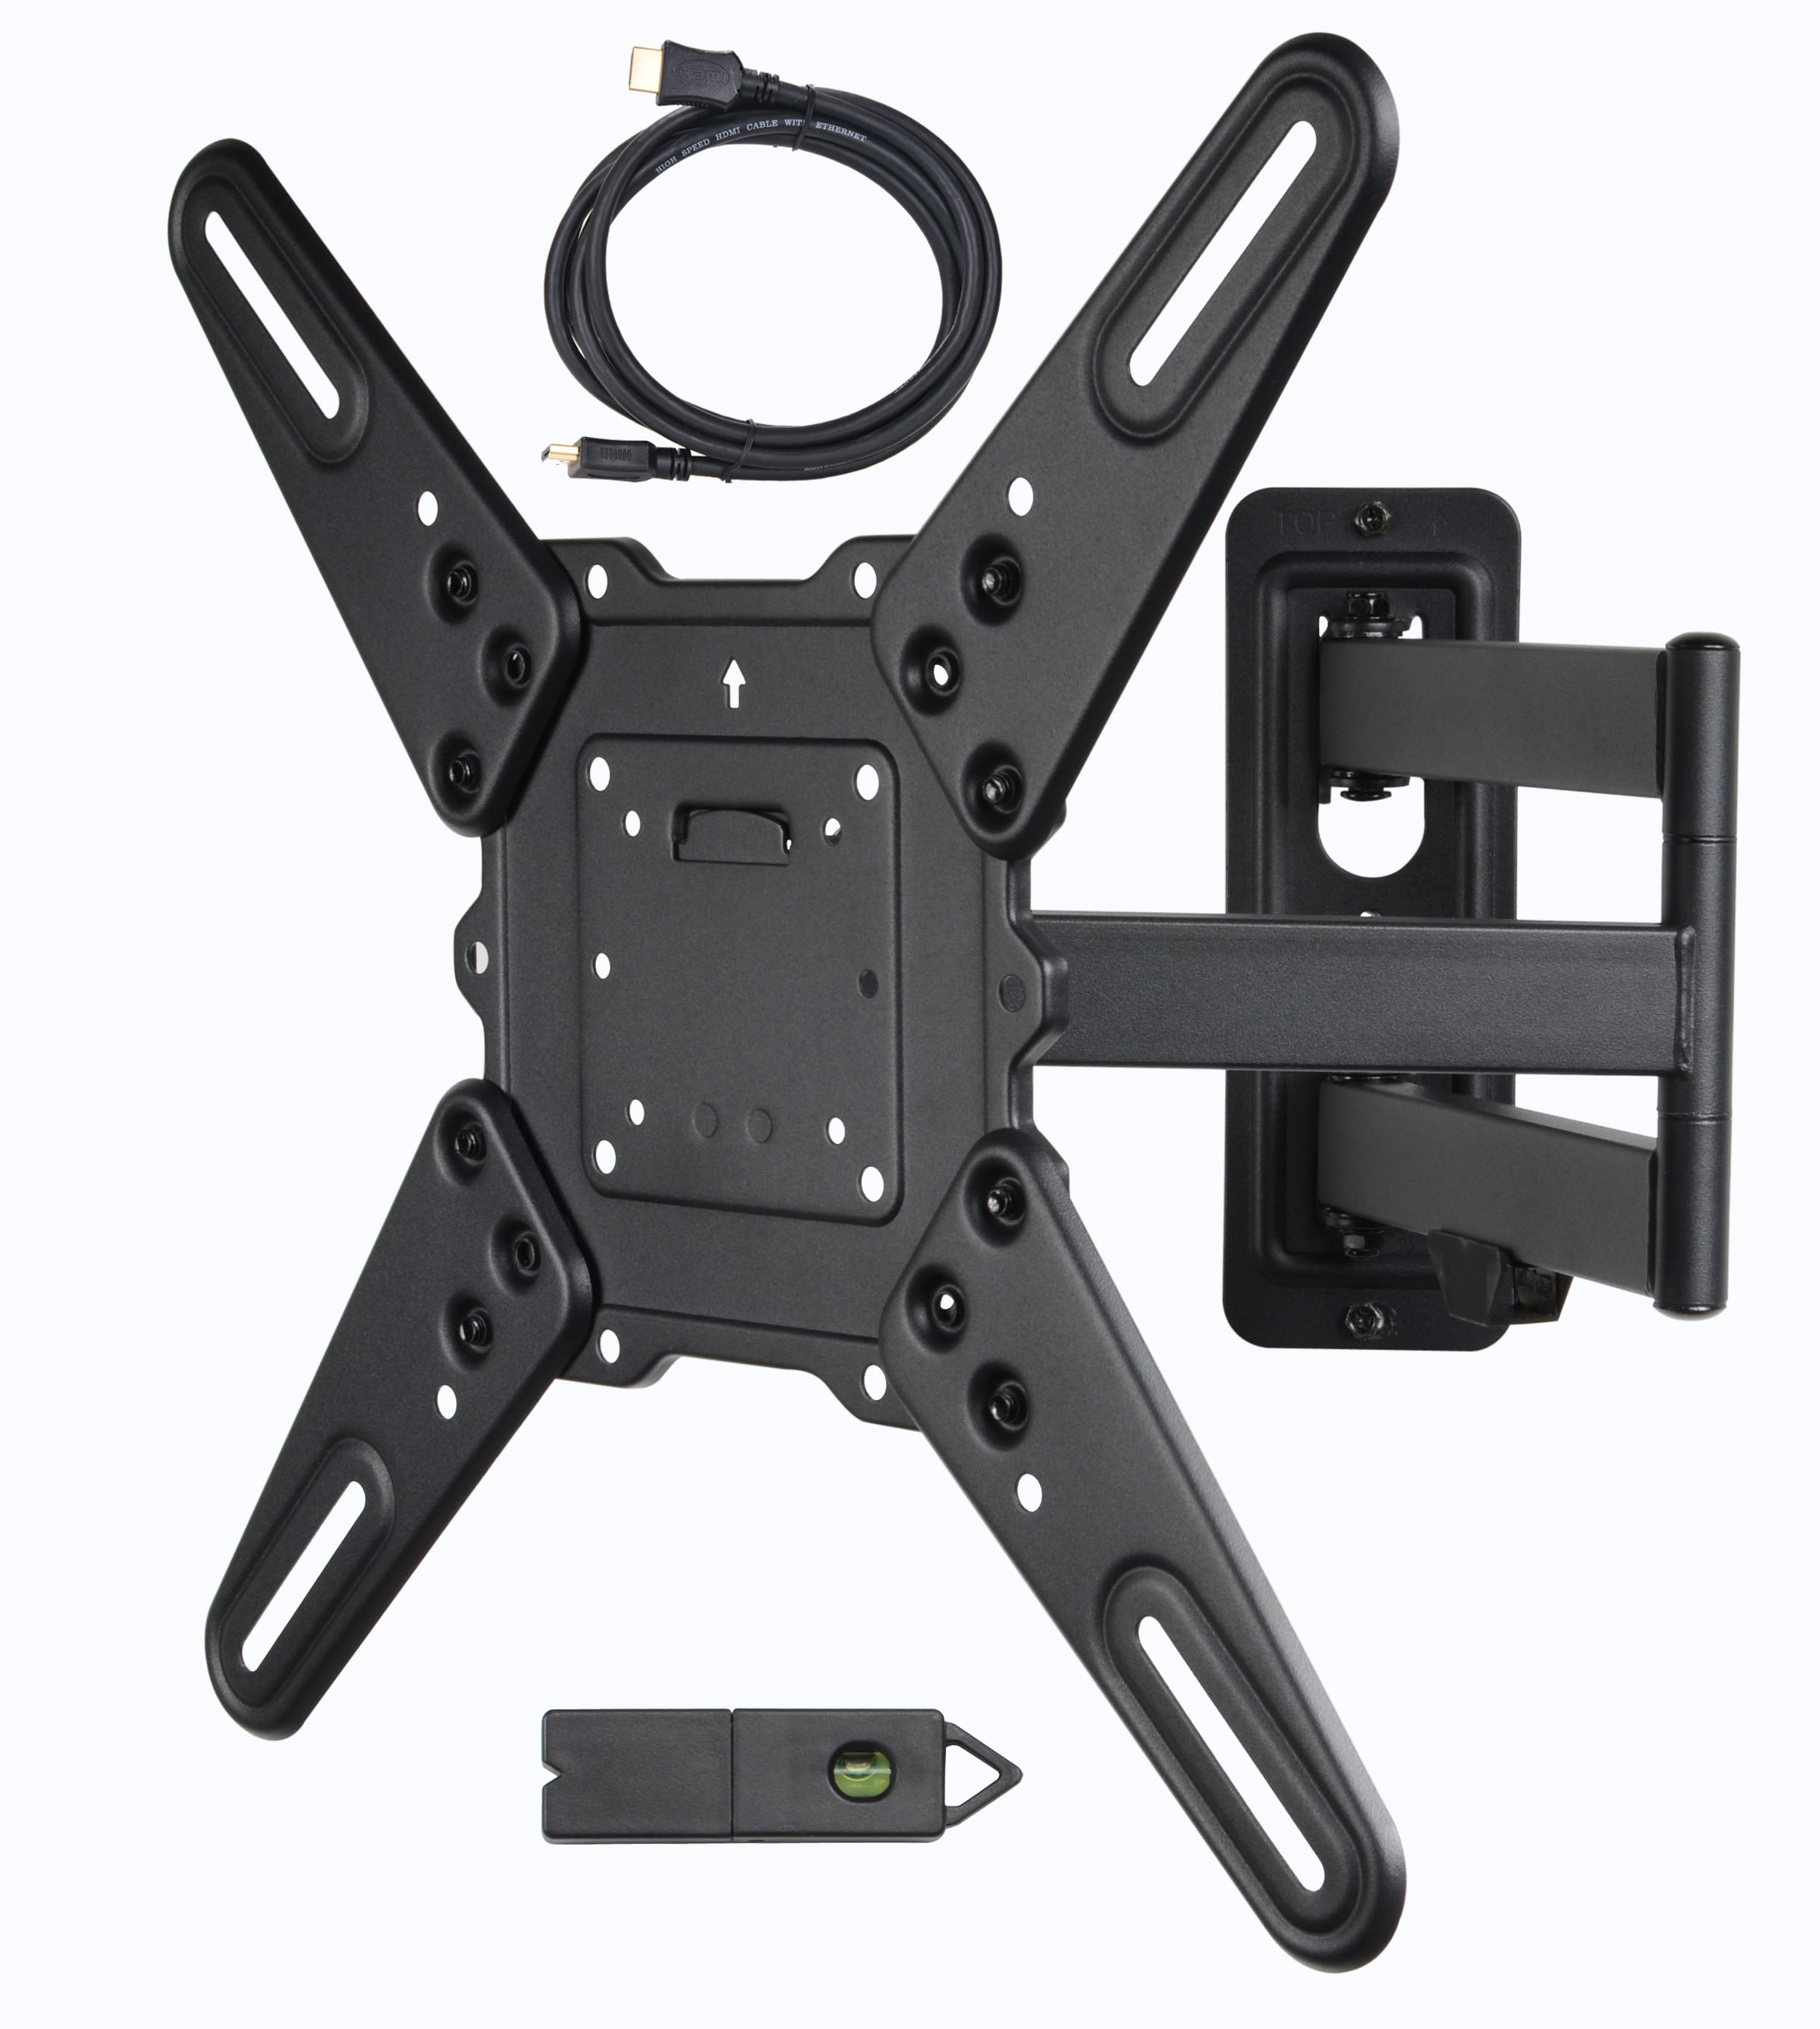 TV Wall Mount Bracket for 26-50" TVs up to VESA 400mm and 66lbs in Extension Arm